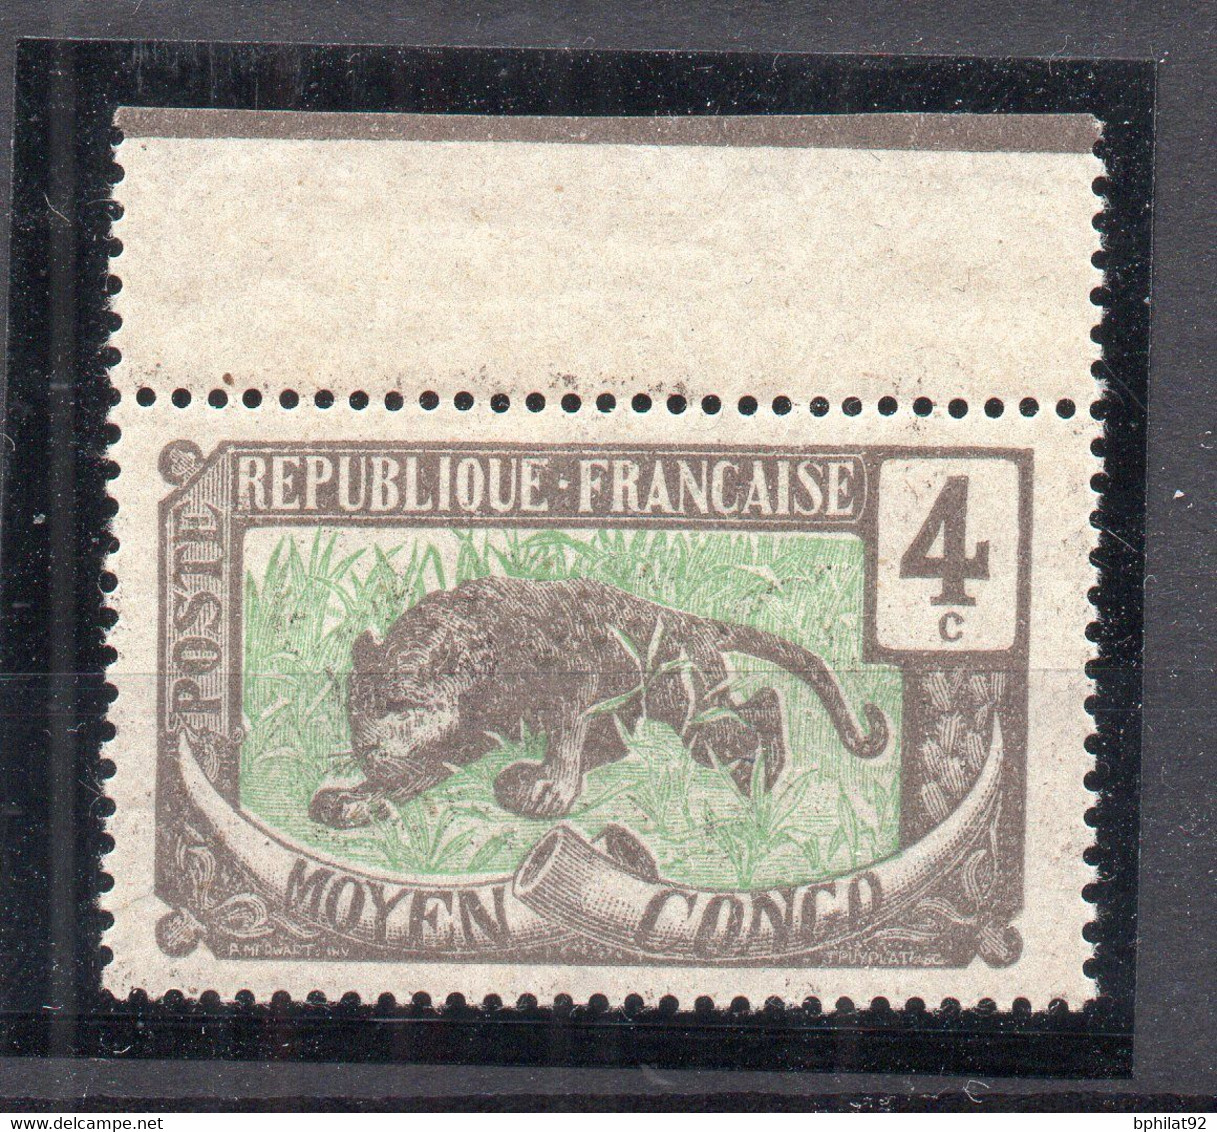 !!! CAMEROUN, N°86a SANS LA SURCHARGE CAMEROUN NEUF GOMME COLONIALE, SIGNE BRUN - Unused Stamps